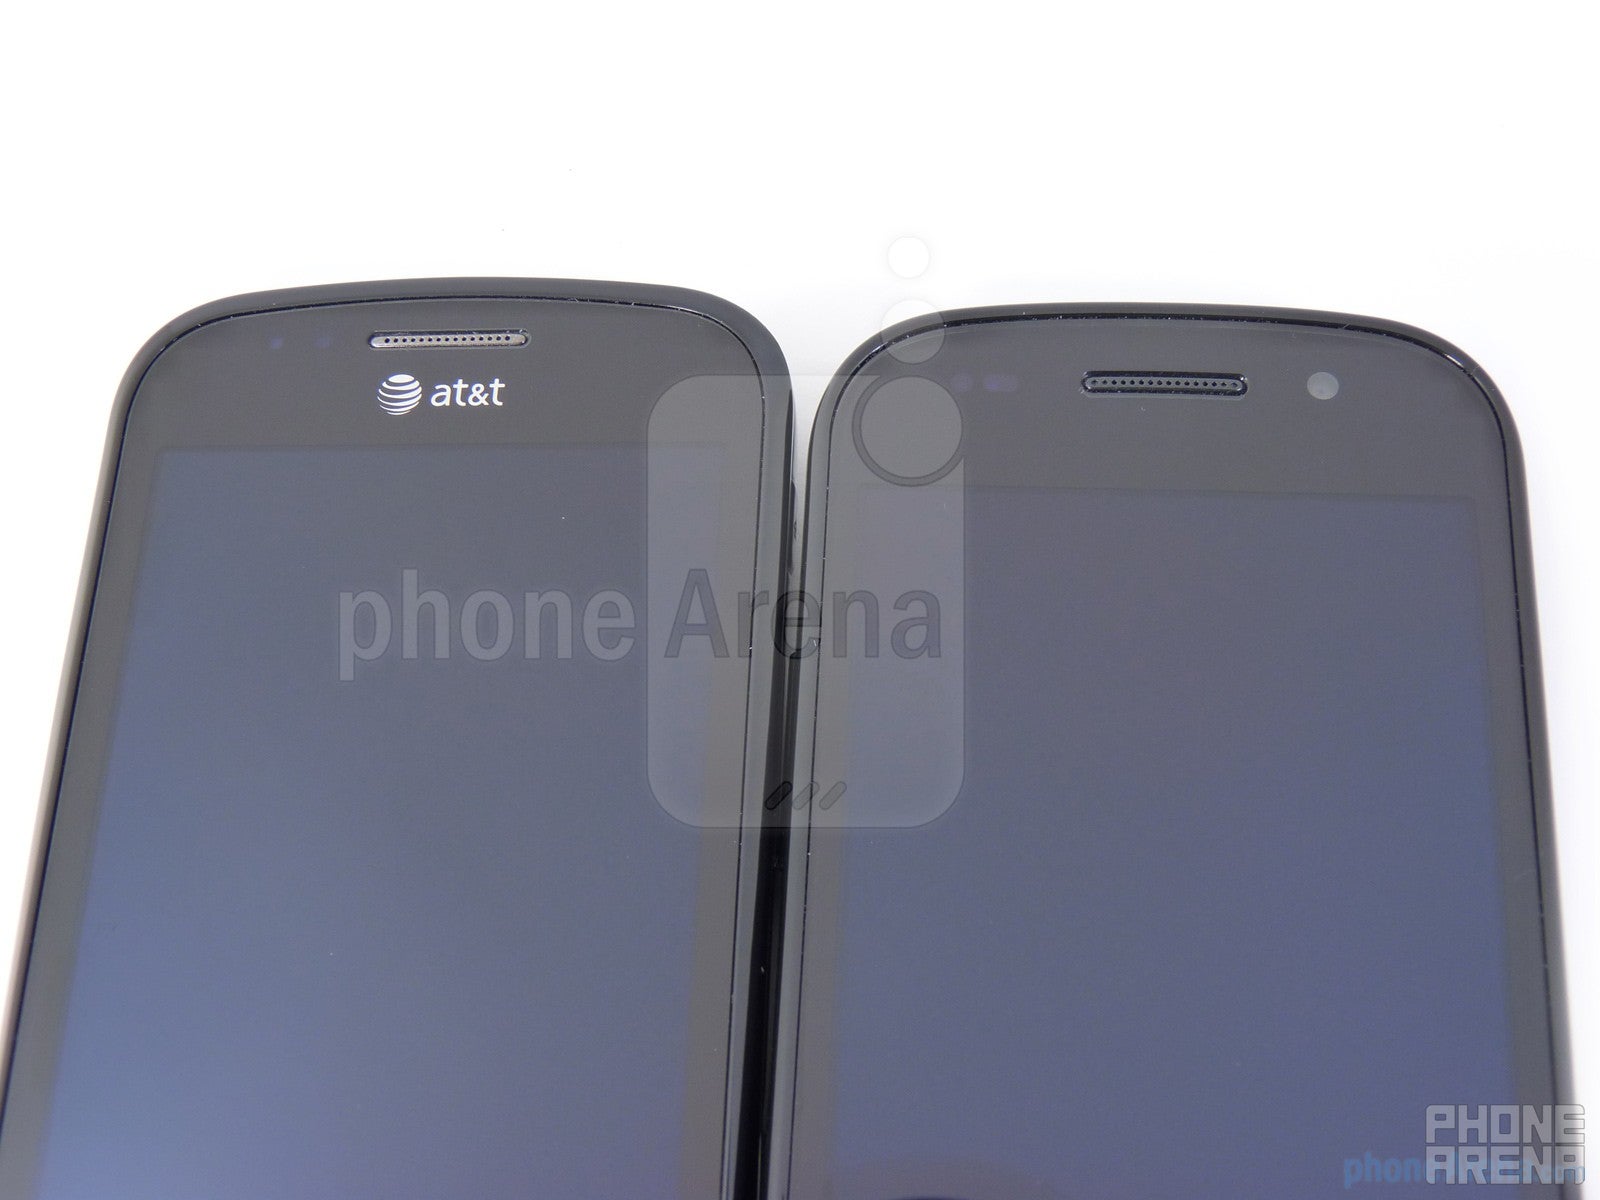 The Samsung Focus (L) and the Google Nexus S (R) - Google Nexus S vs Samsung Focus